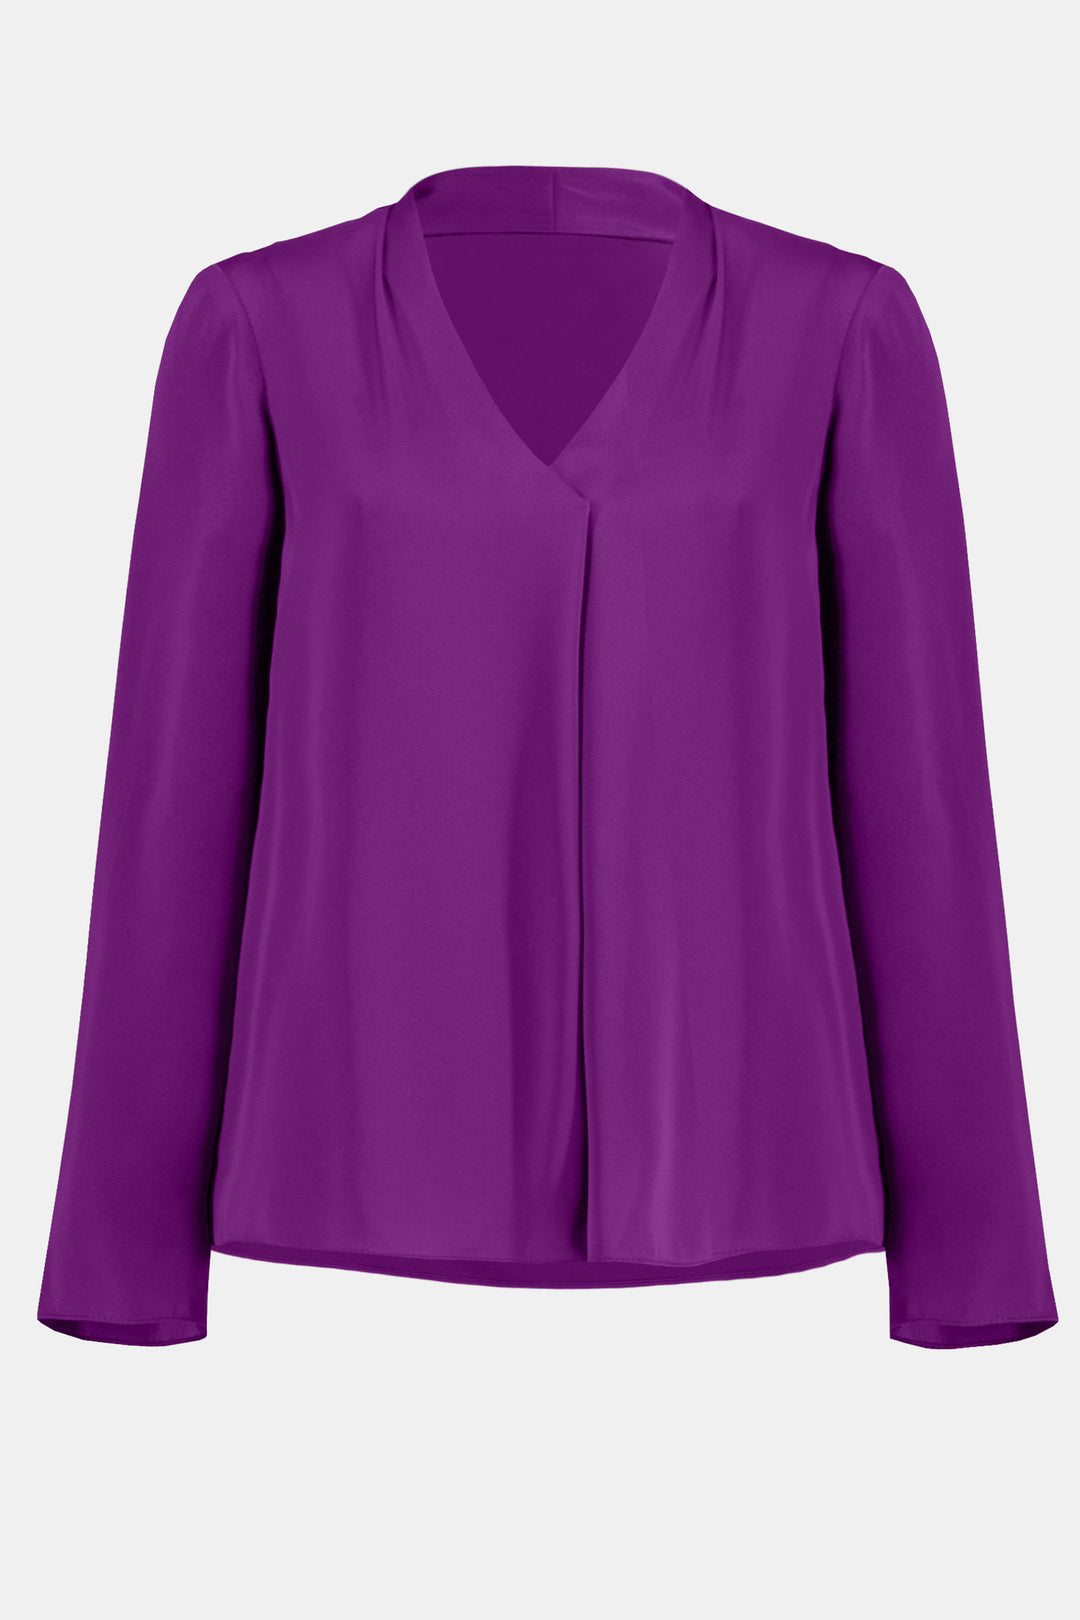 Joseph Ribkoff Fall 2024  Its sheer shine from the luxurious satin fabric and elegant v-neck design make it unlike any other blouse out there! 